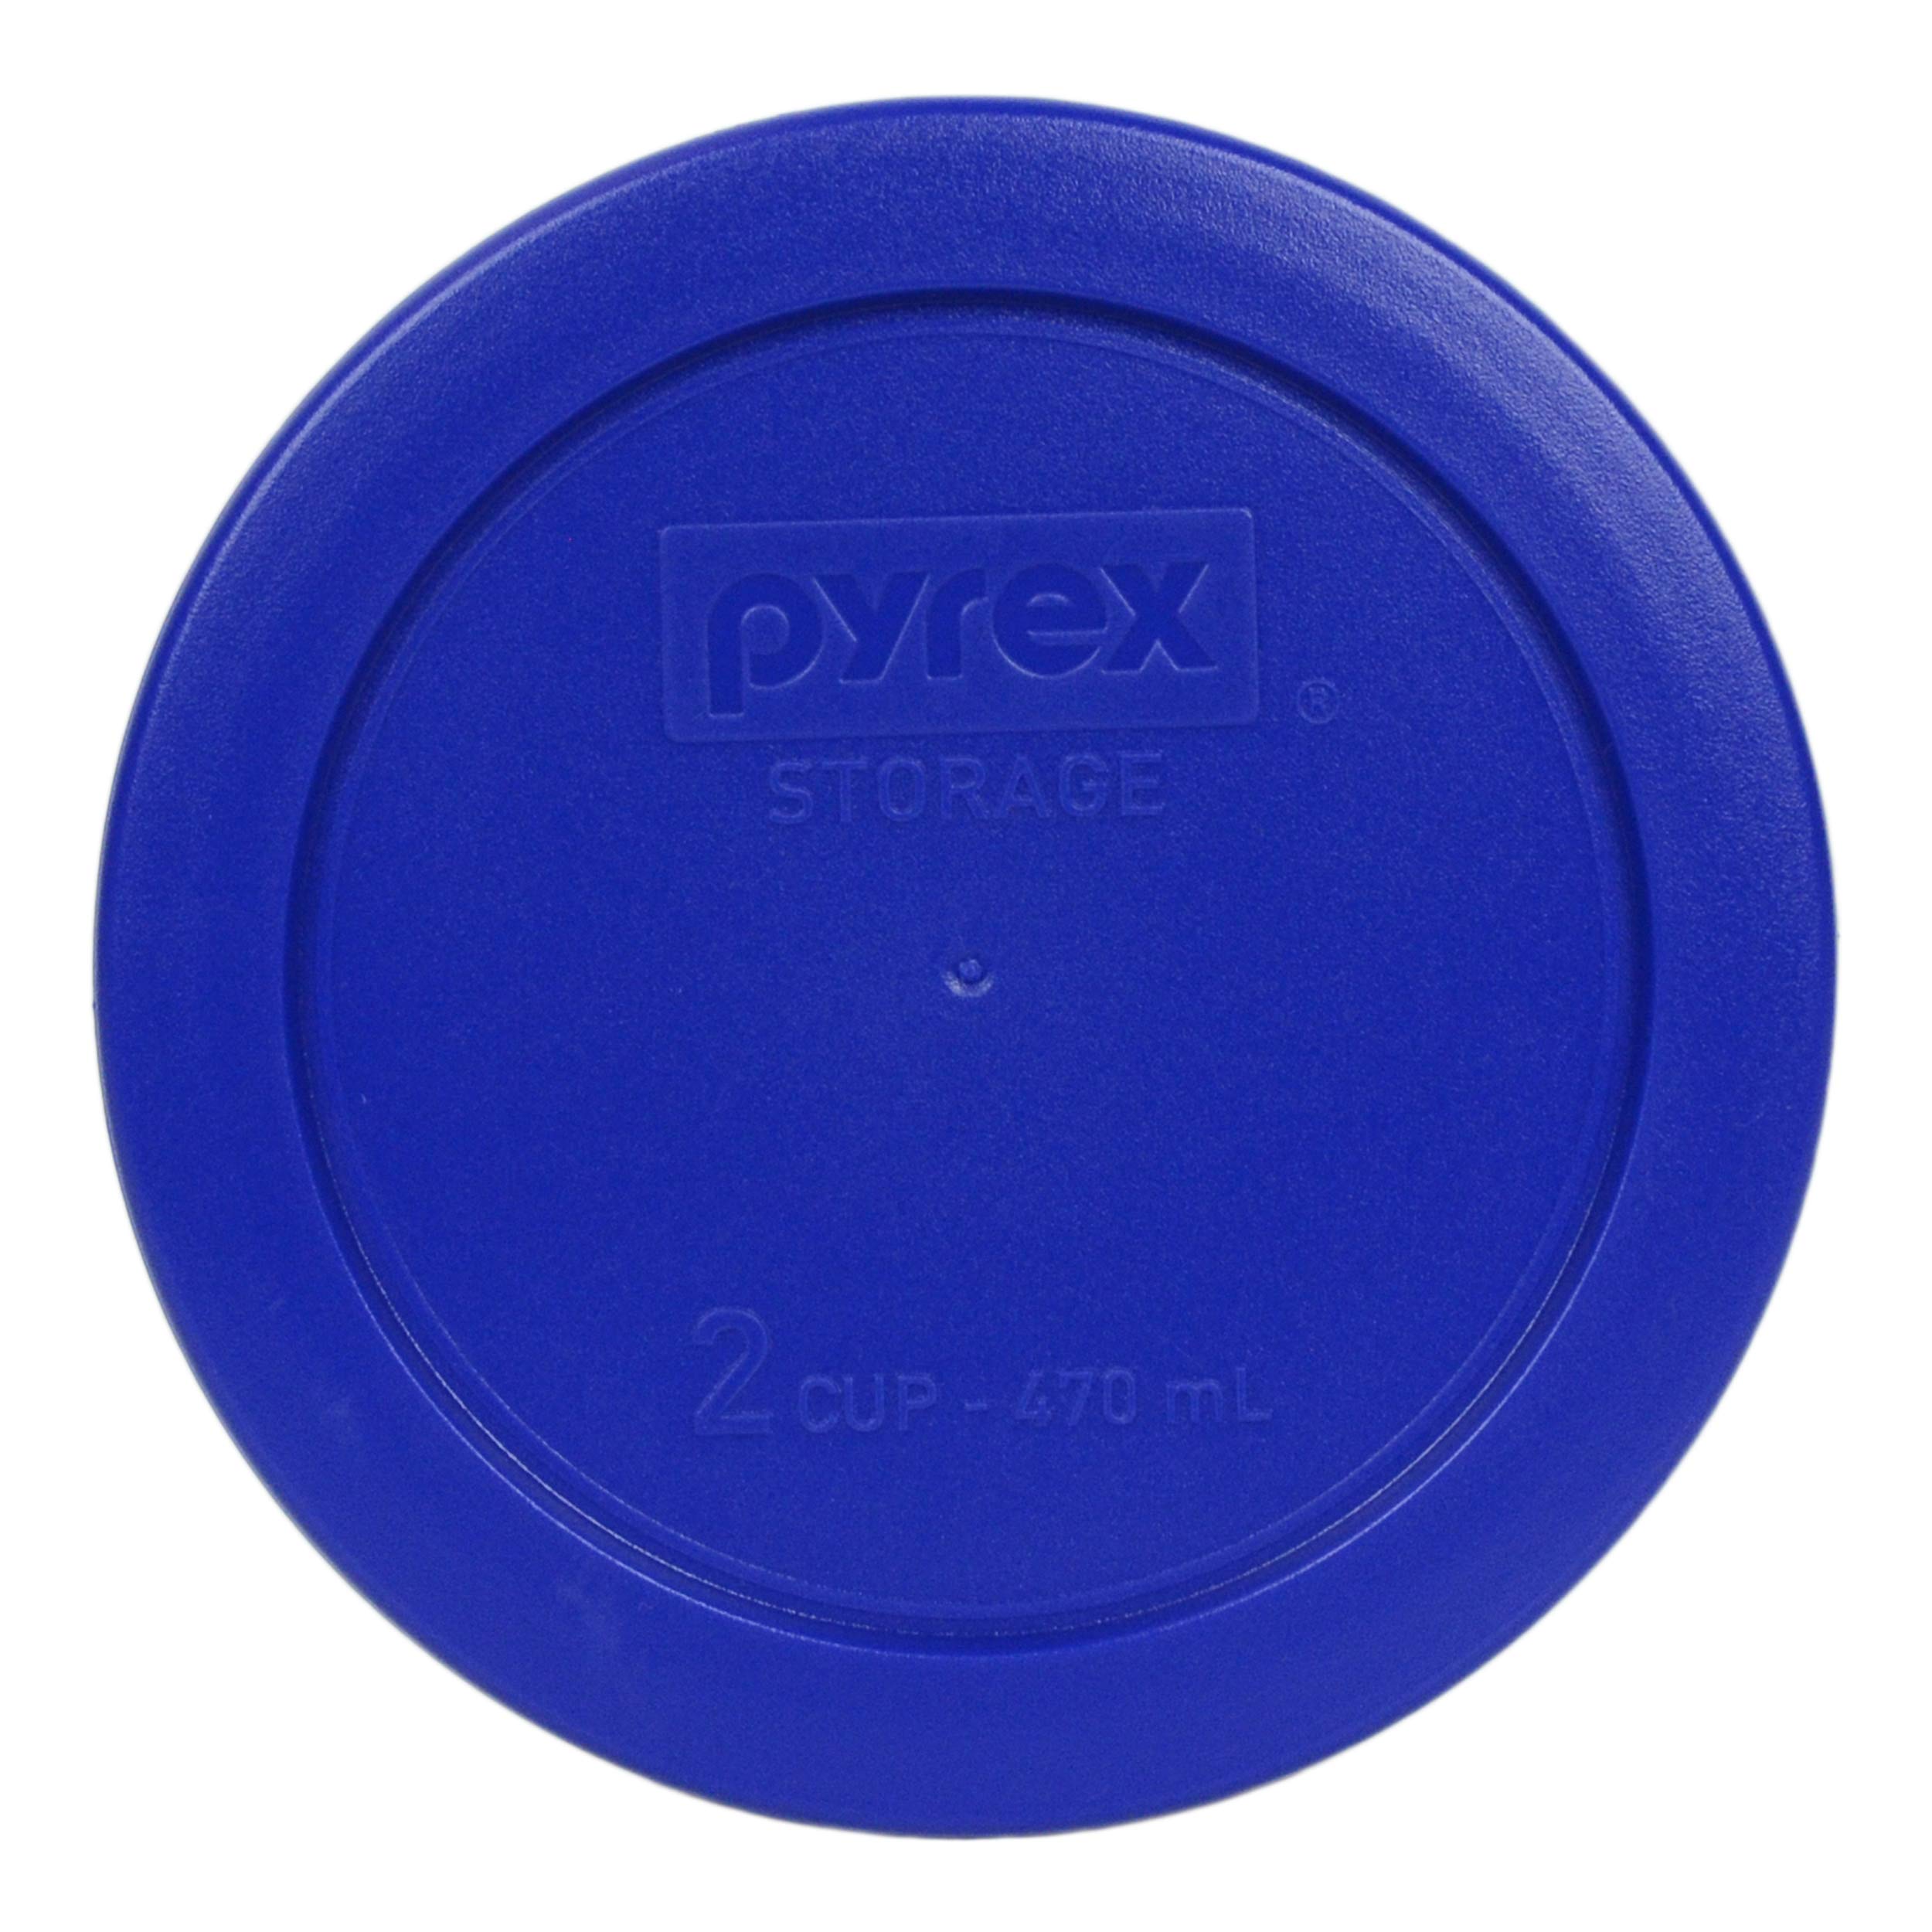 Pyrex (2) 7402-PC 6/7 Cup Blue (2) 7201-PC 4 Cup Meyer Yellow (3) 7200-PC 2 Cup Cadet Blue (2) 7202-PC 1 Cup Blue Replacement Food Storage Lids Made in the USA